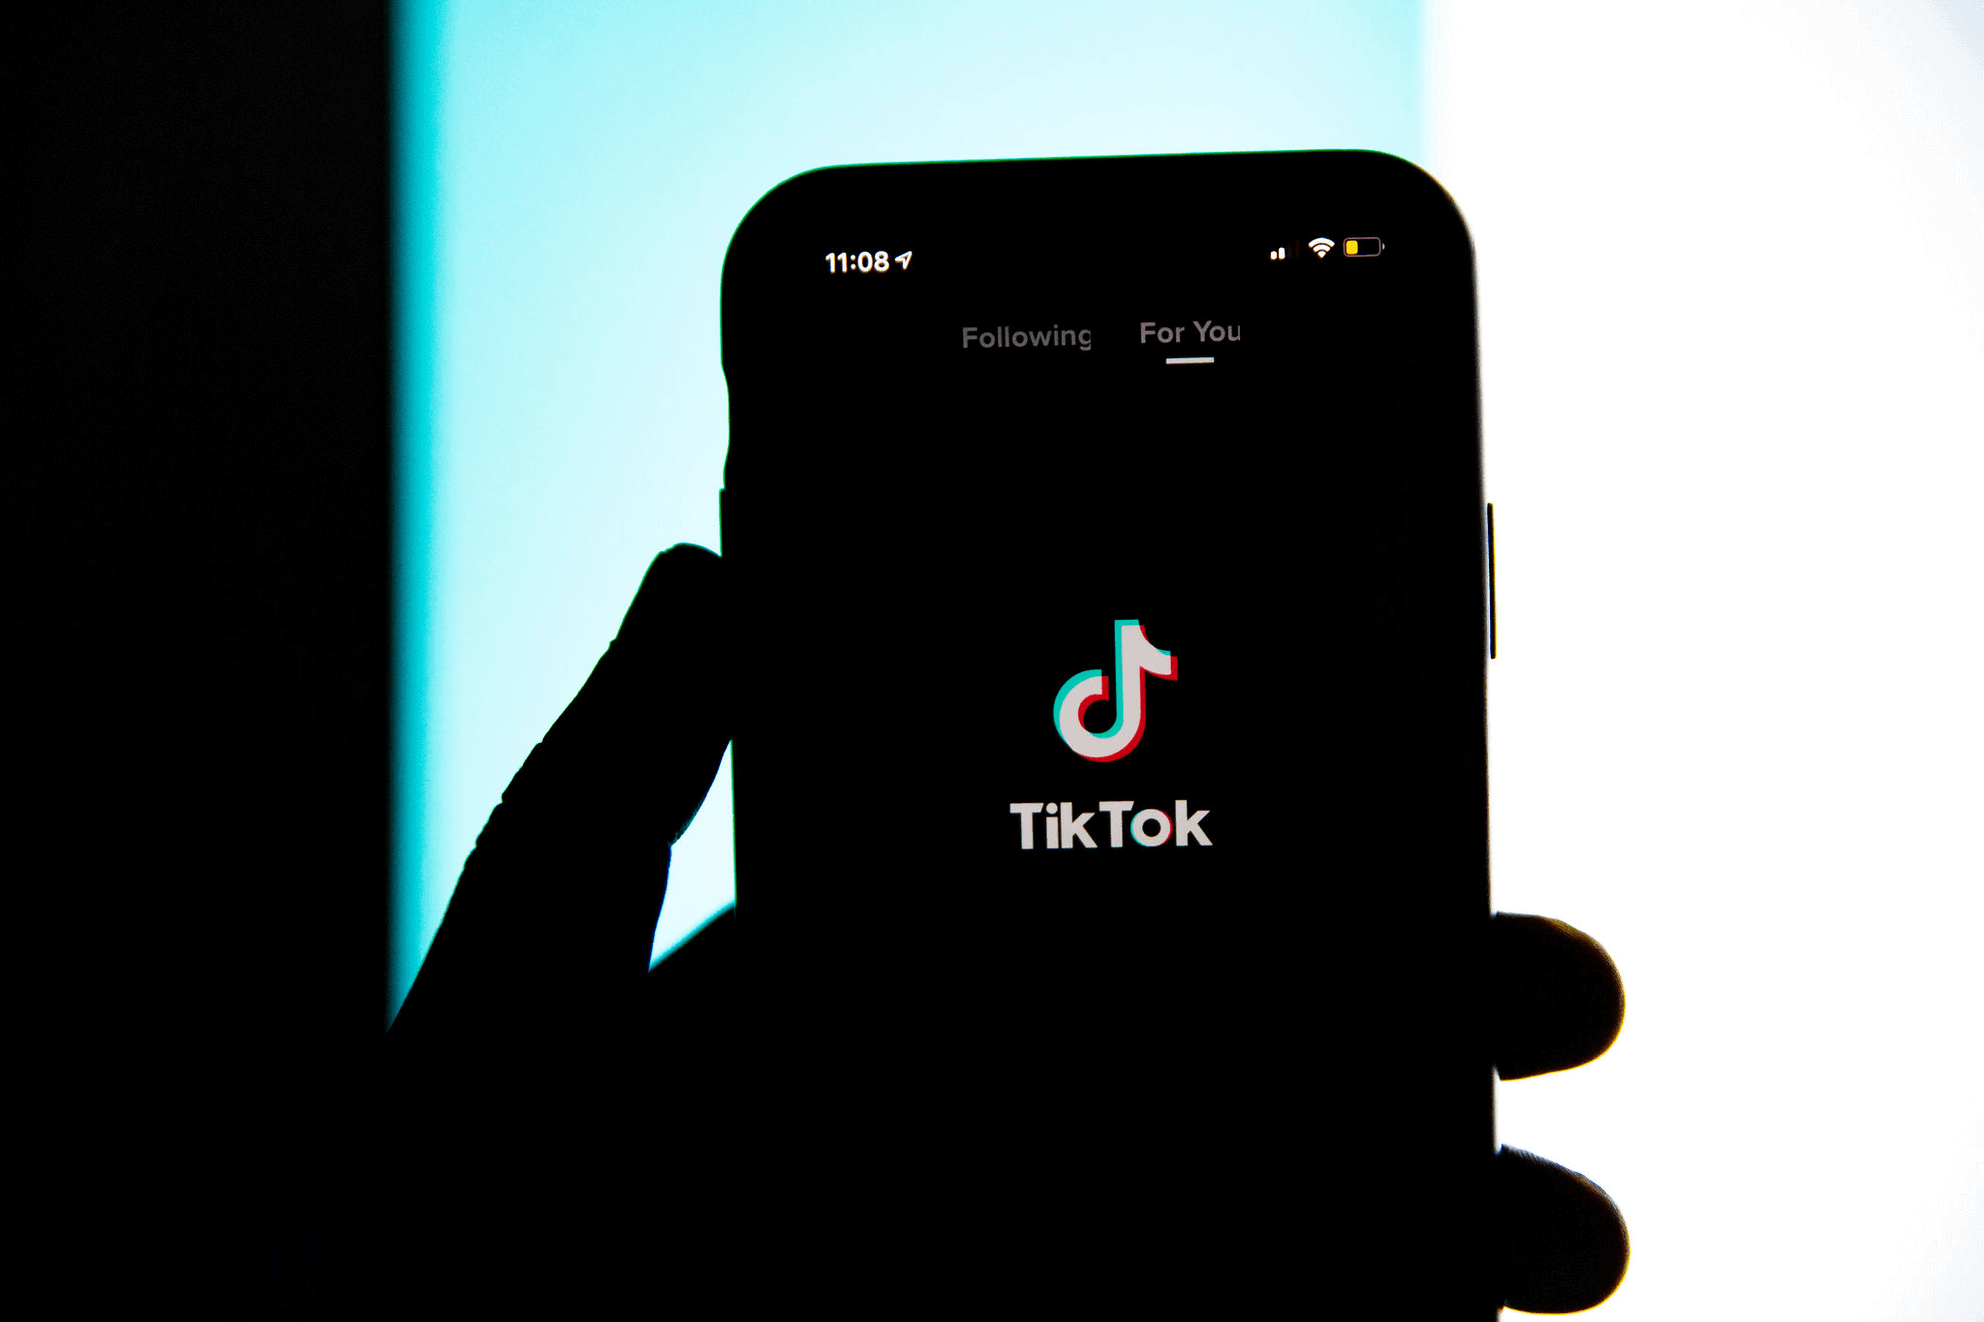 Simon Cowell set to launch StemDrop feature within TikTok